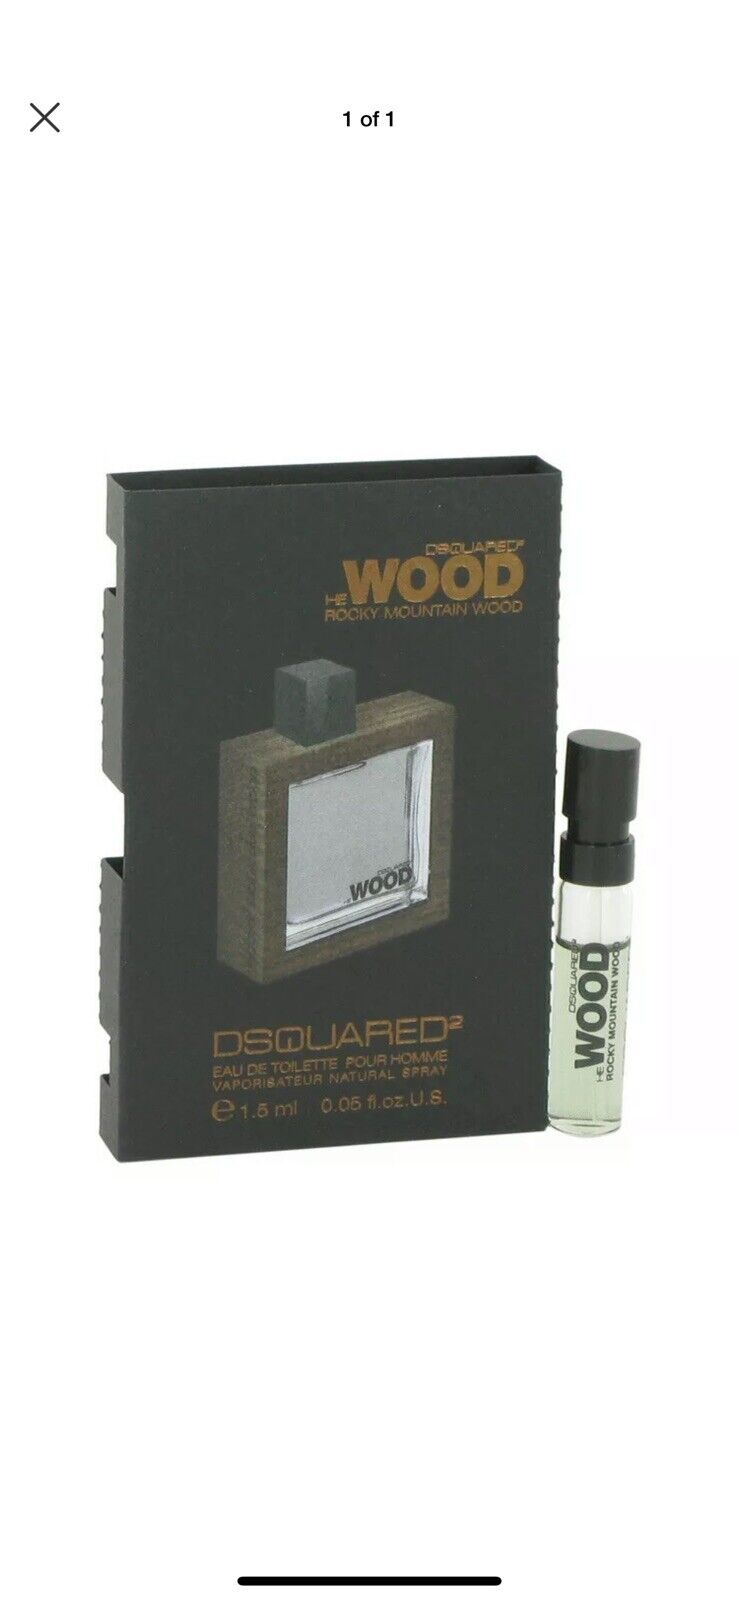 2 X He Wood Rocky Mountain Wood by Dsquared2 0.05 oz Vial (sample) for Men